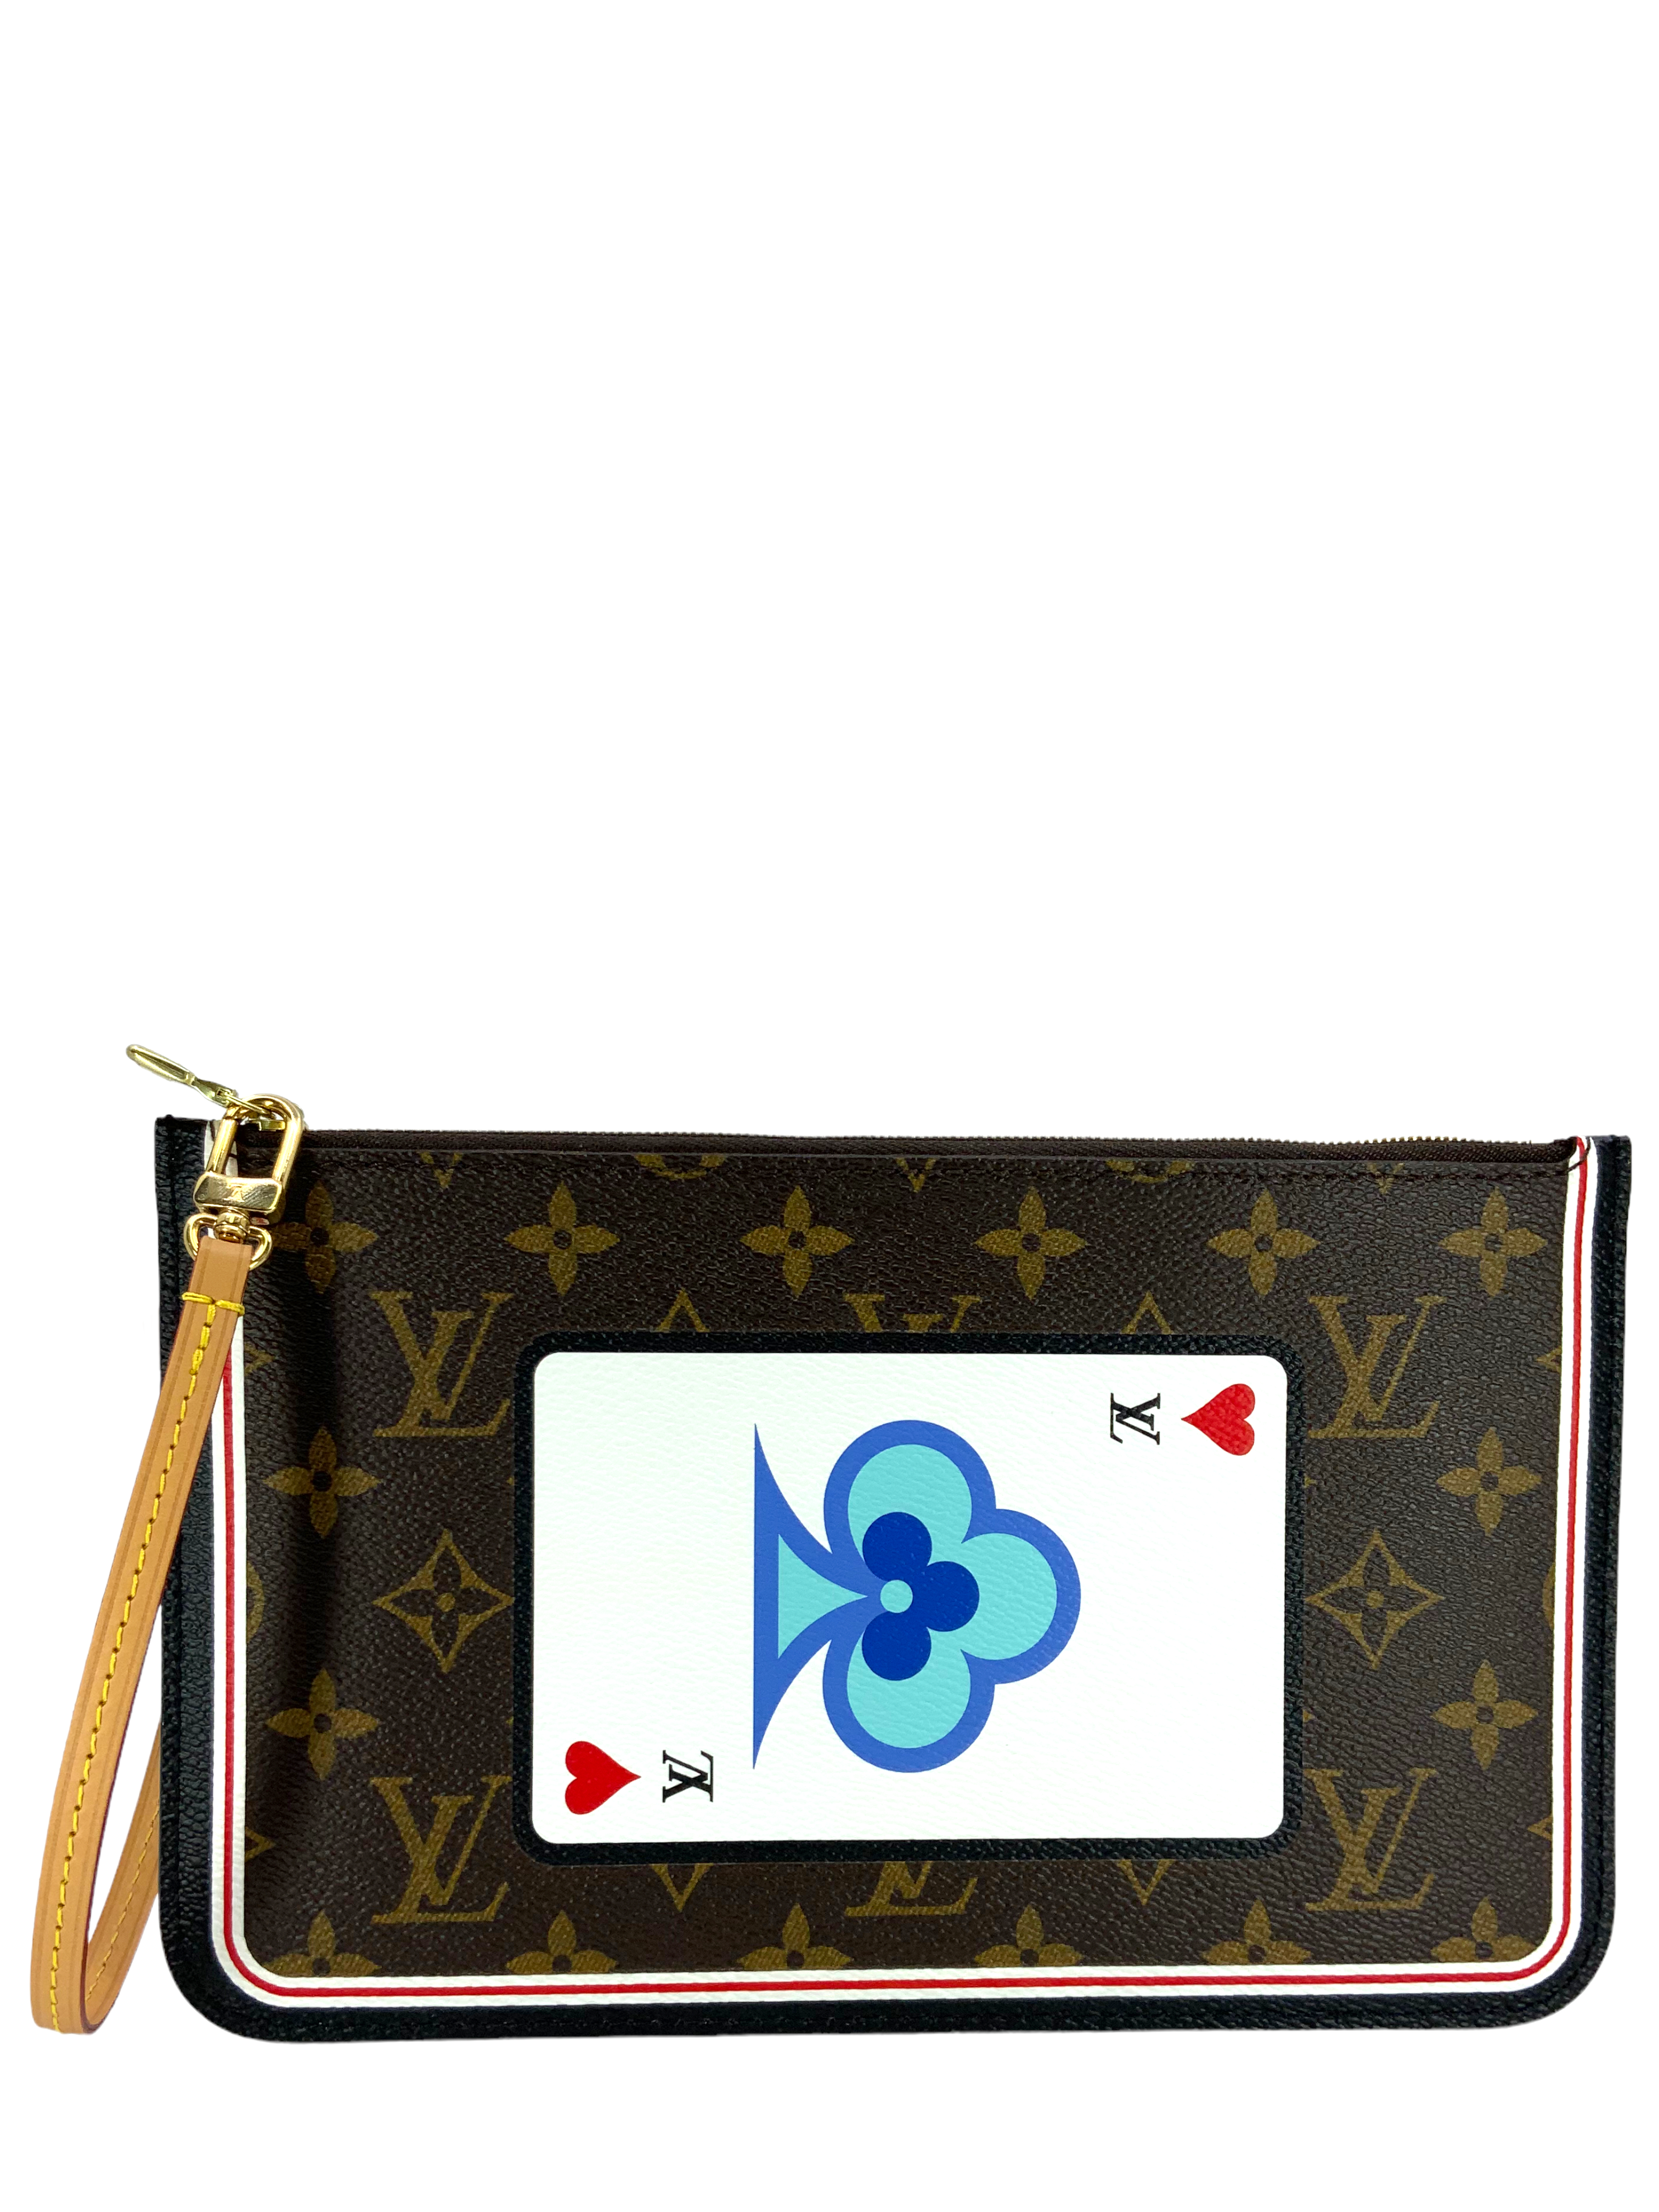 AUTHENTIC LOUIS VUITTON GIANT GAME ON MONOGRAM NEVERFULL MM BAG